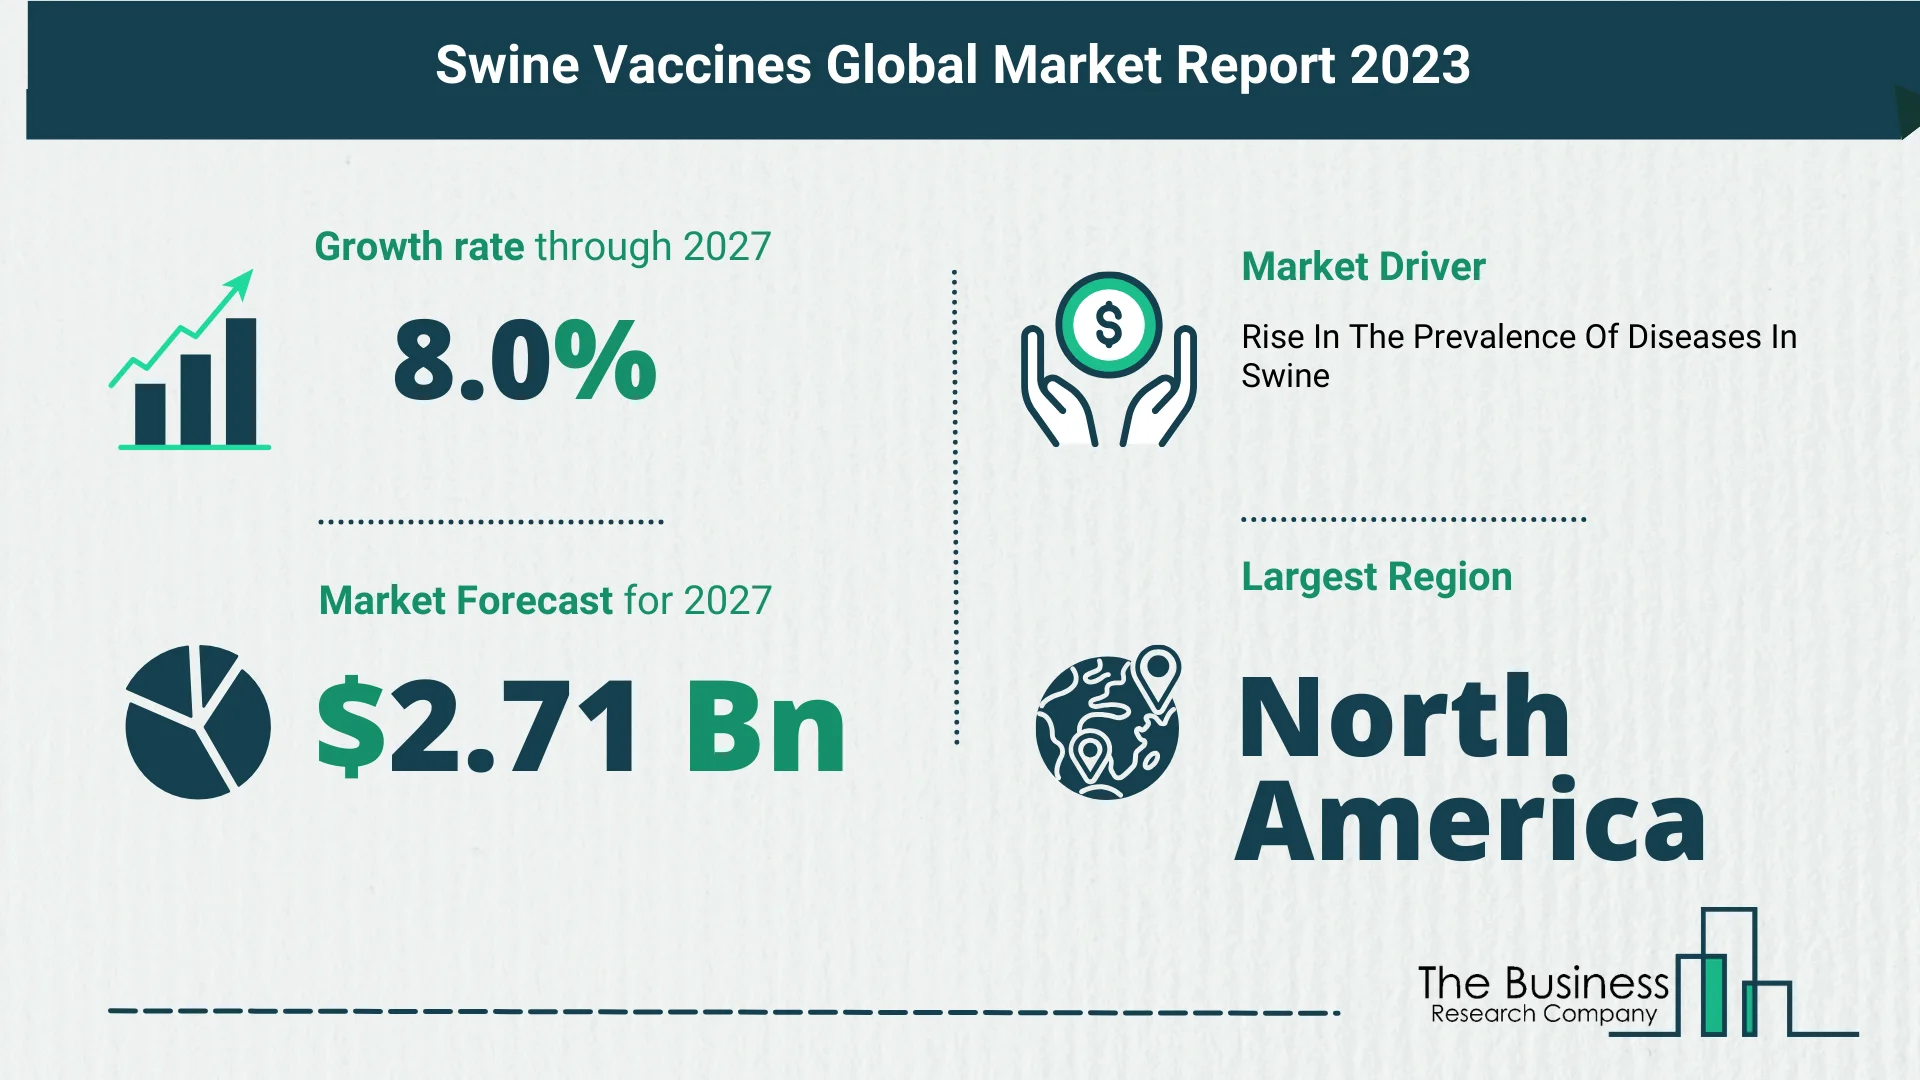 Understand How The Swine Vaccines Market Is Poised To Grow Through 2023-2032